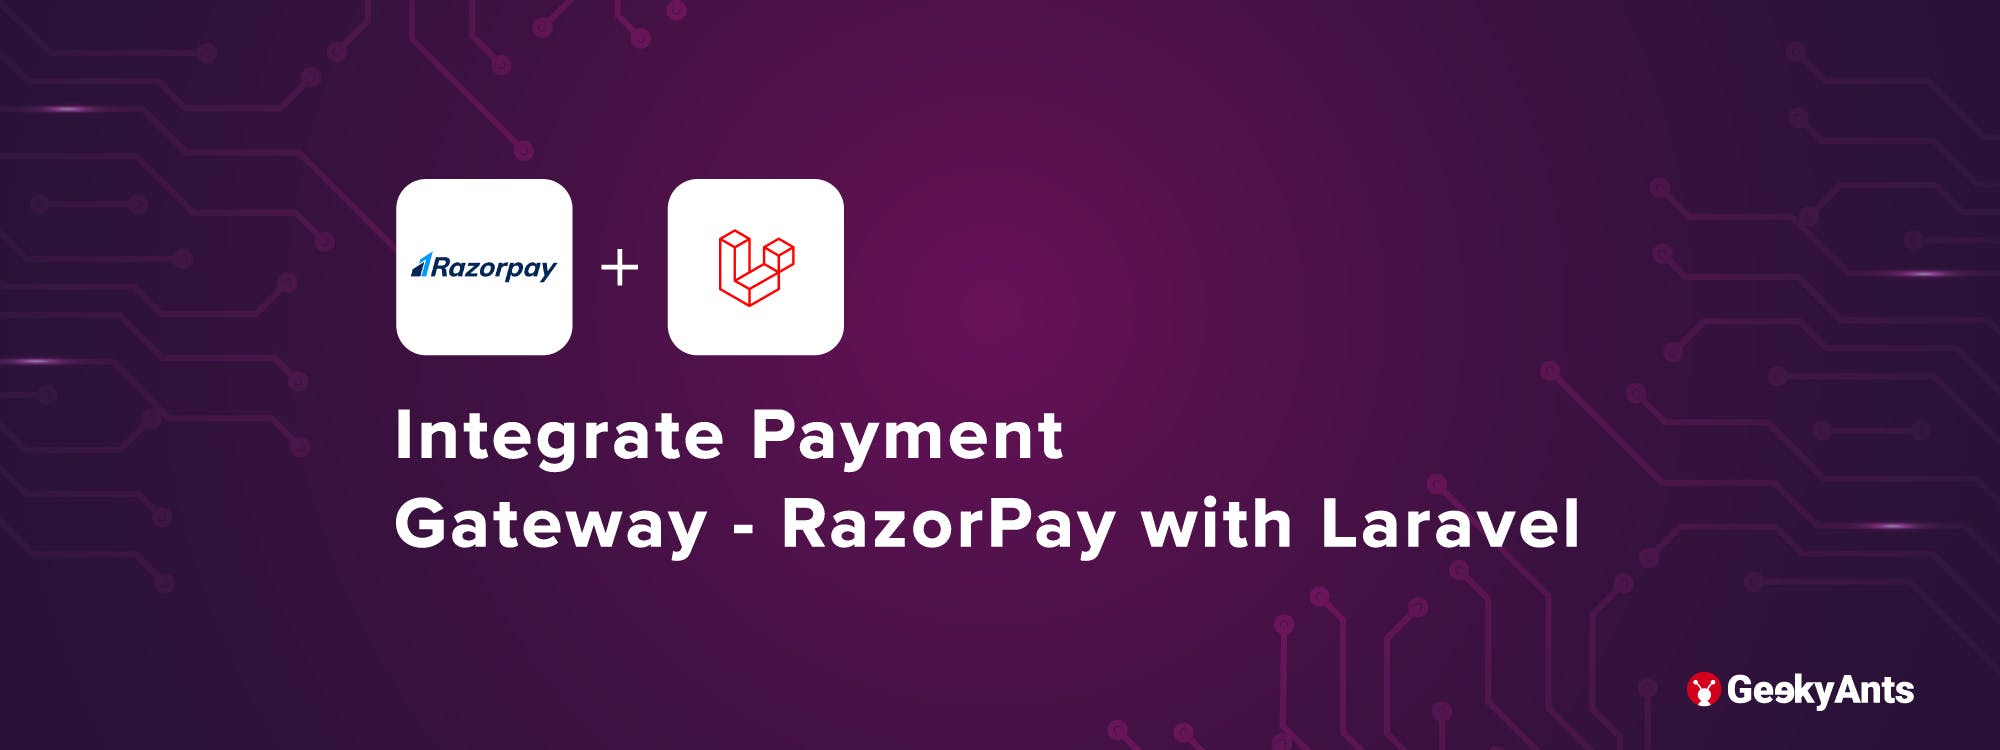 Integrate Payment Gateway - RazorPay with Laravel